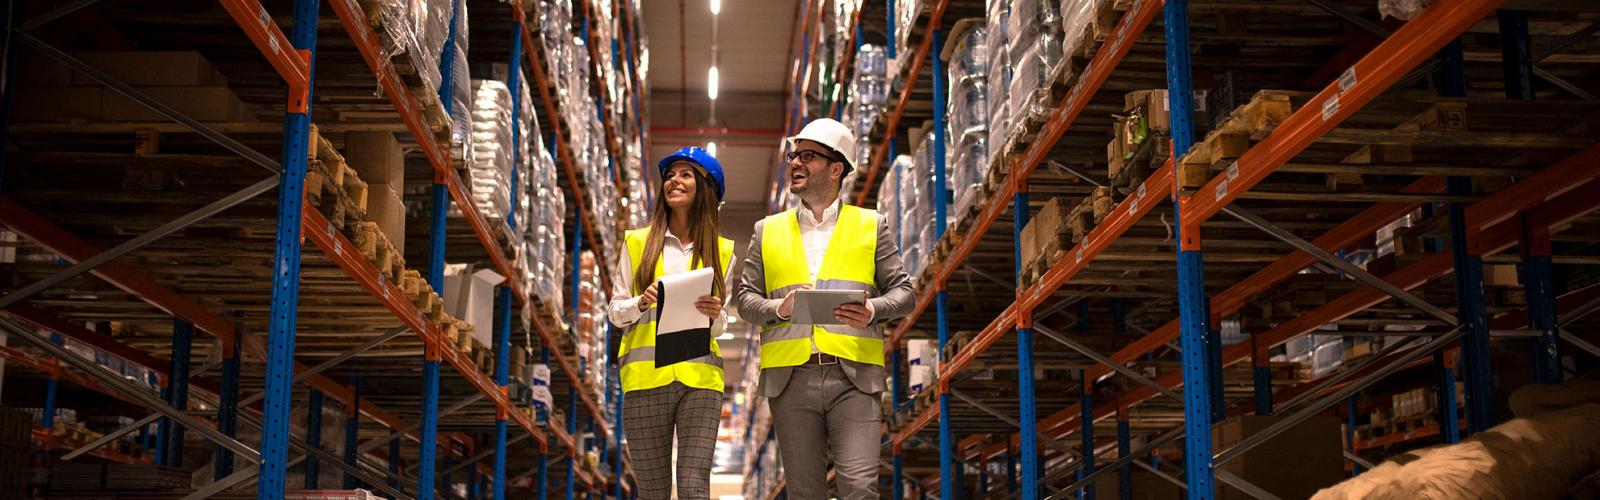 Two supply chain students walking in a warehouse